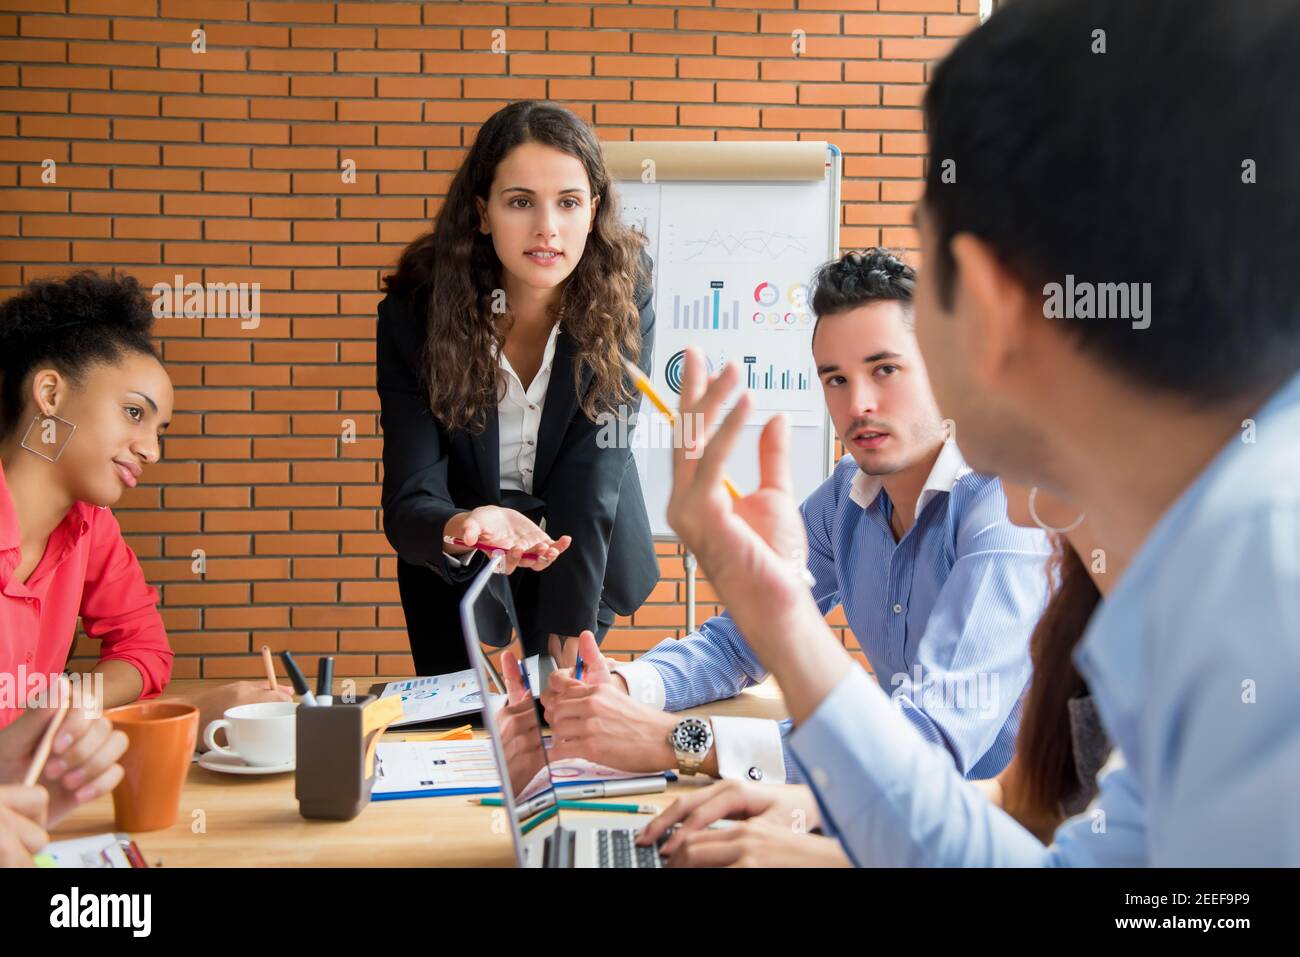 Businesswoman as a meeting leader asking her colleague for an opinion while making a presentation Stock Photo